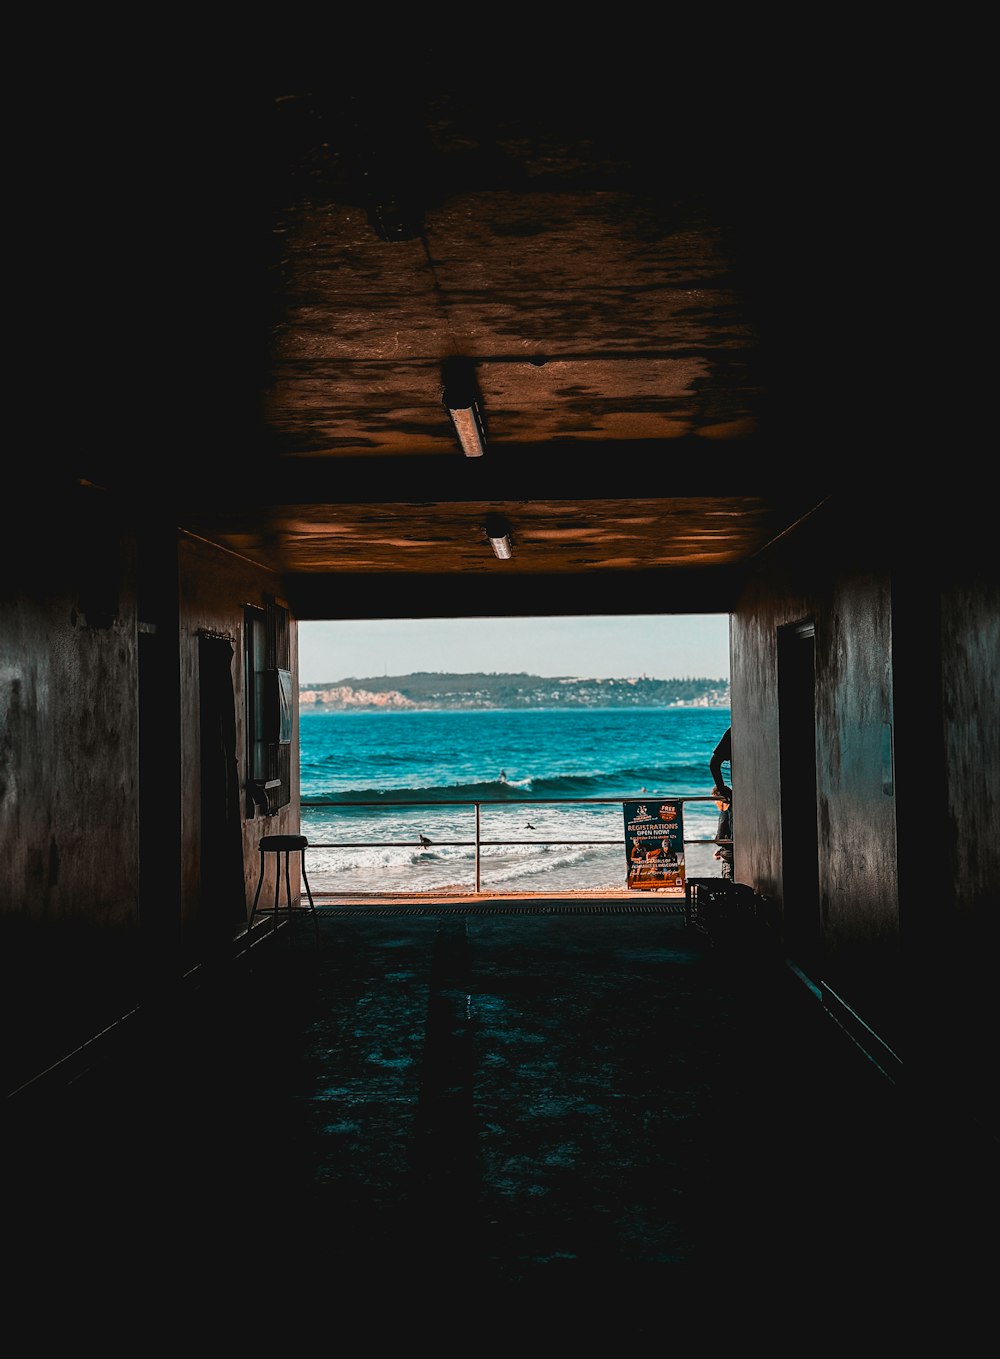 a person standing in a doorway looking out at the ocean